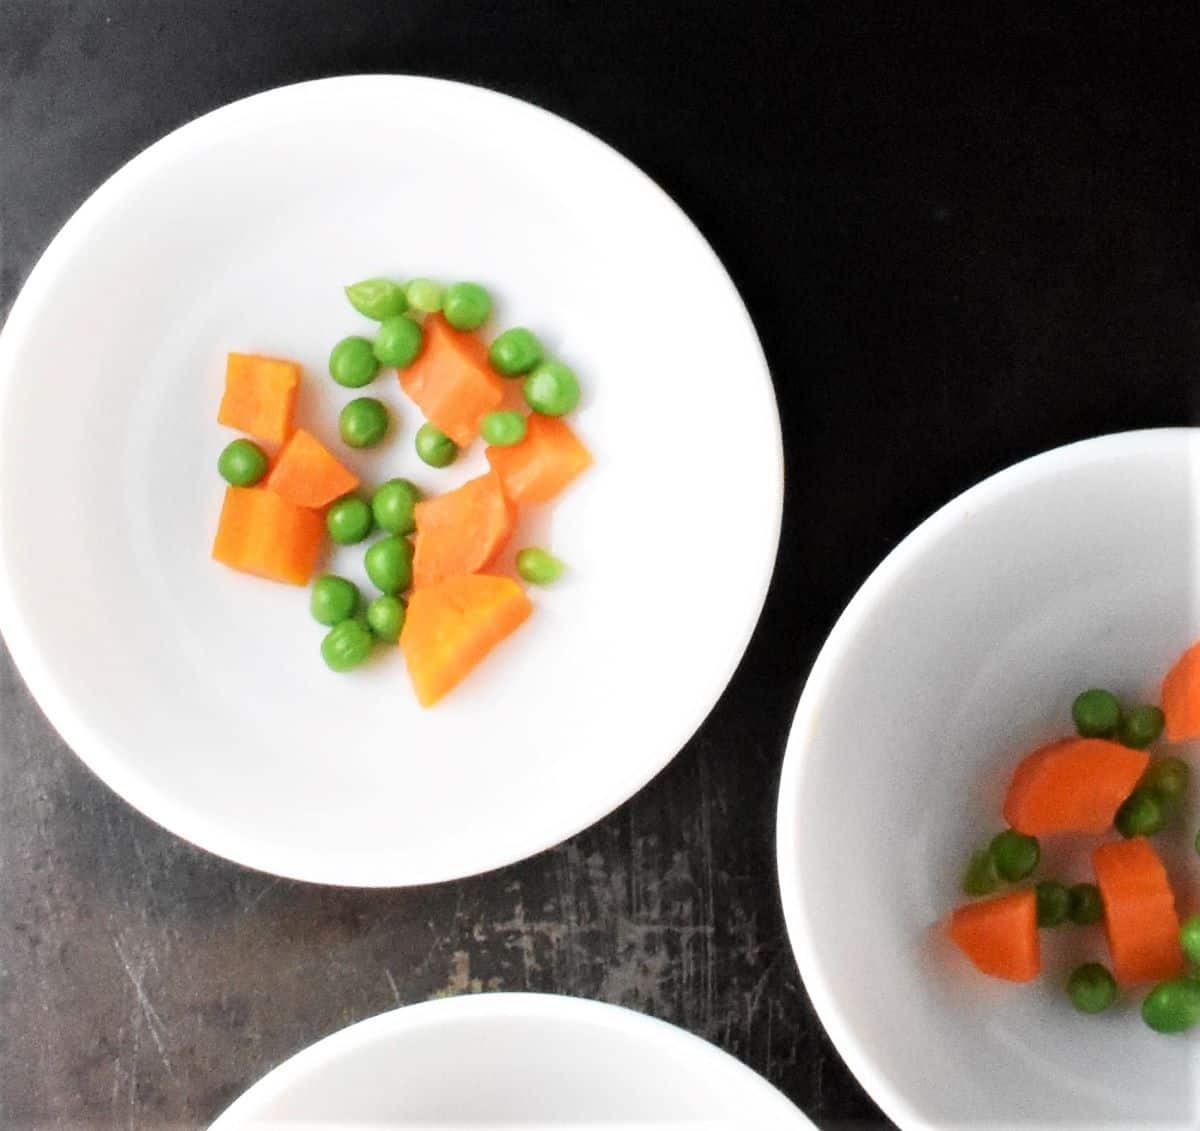 Chopped carrots and peas in white bowls.